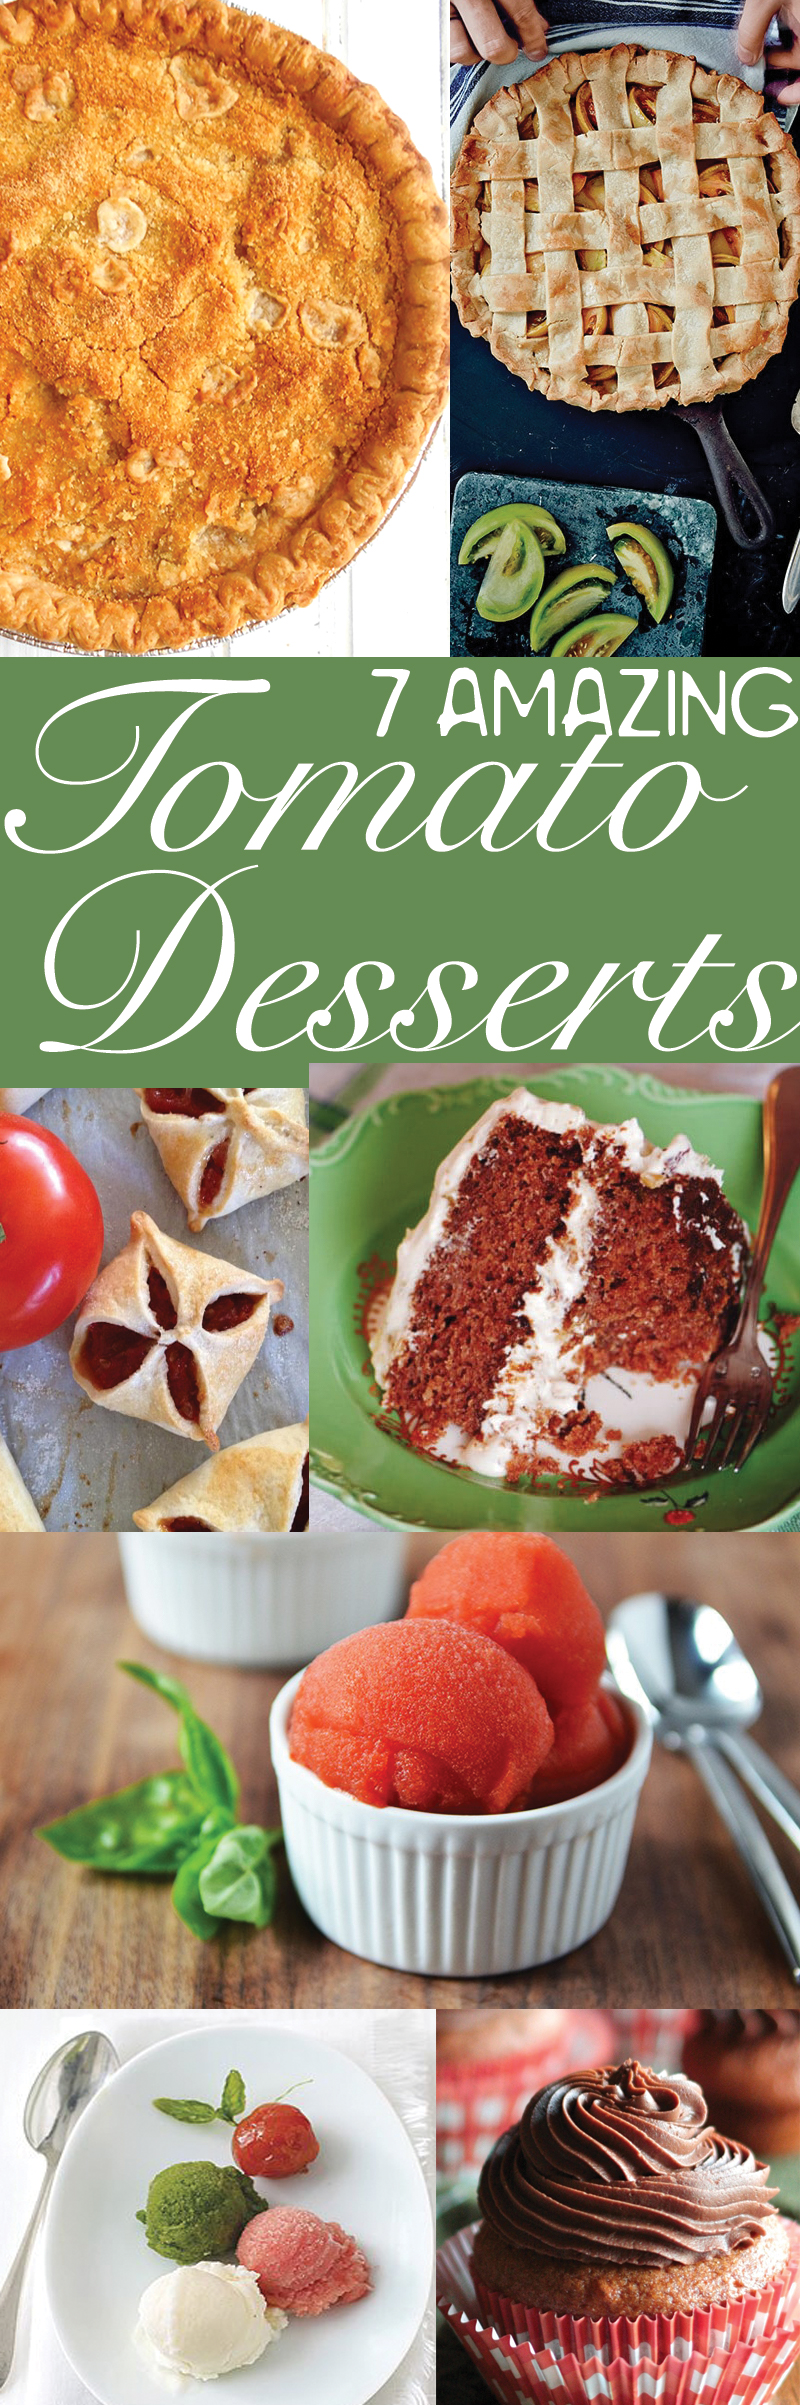 Tomatoes are often overlooked in desserts. These tomato desserts celebrate their versatility, especially in desserts like tomato pies & tomato cupcakes. | Holiday Desserts, easy desserts, unique desserts, amazing desserts, tomato recipes